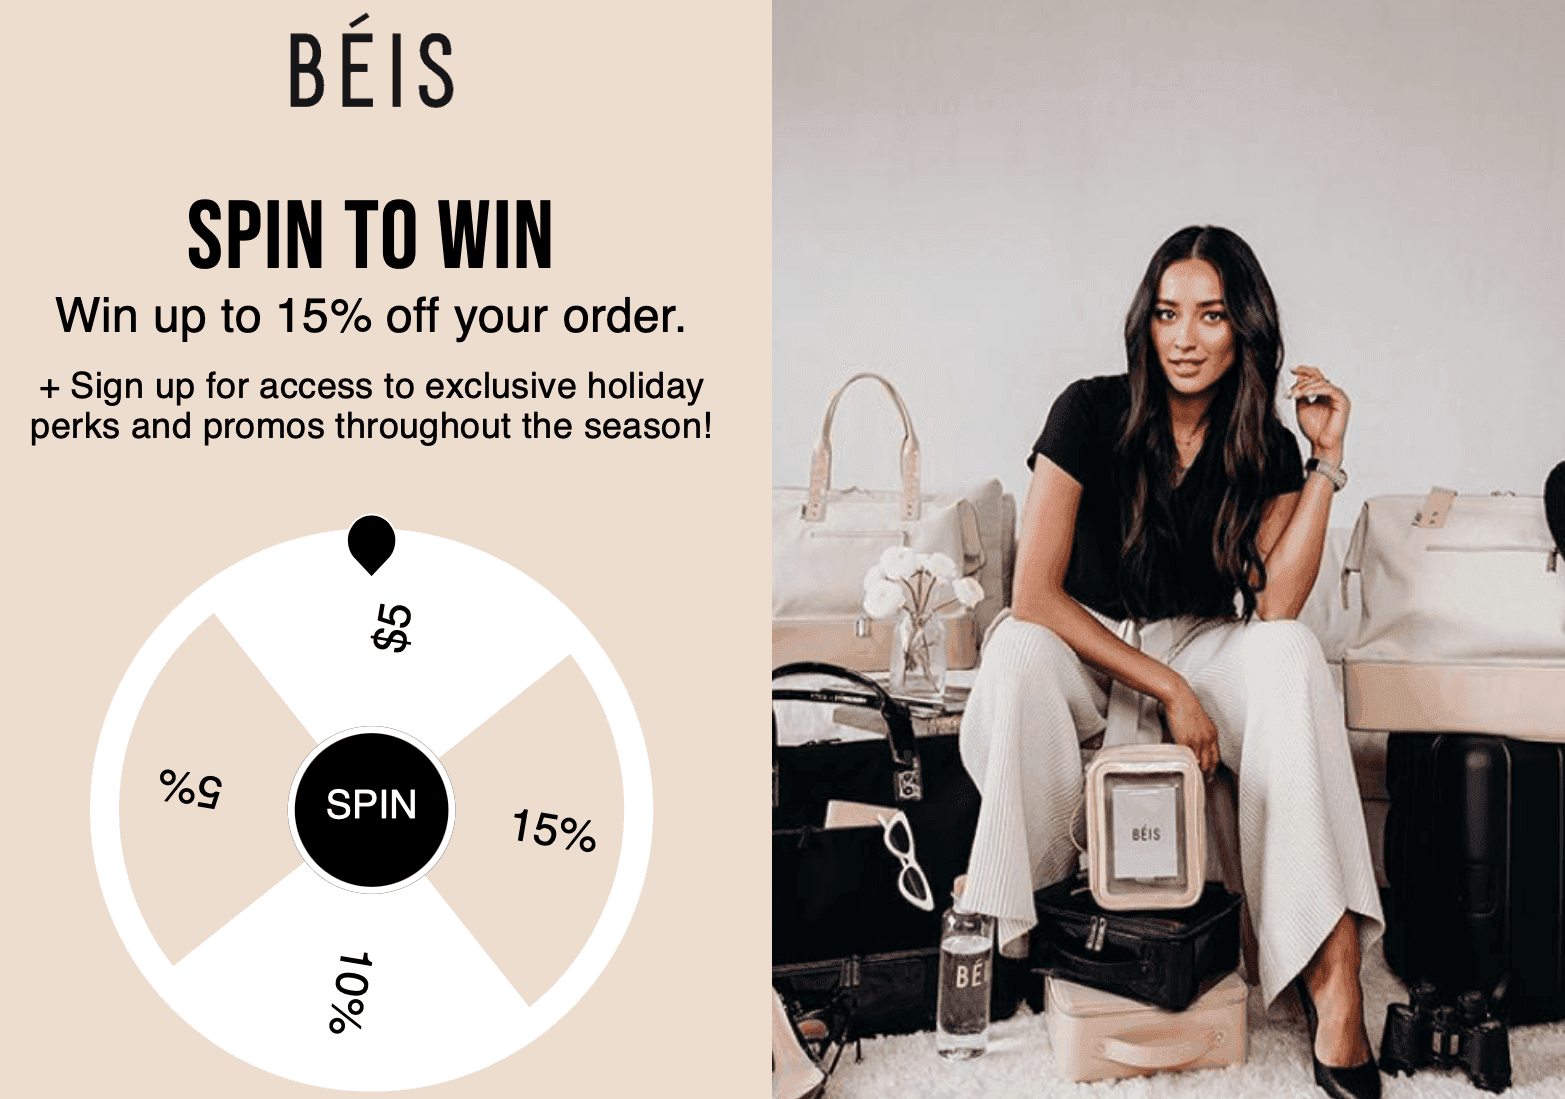 Beis spin to win wheel